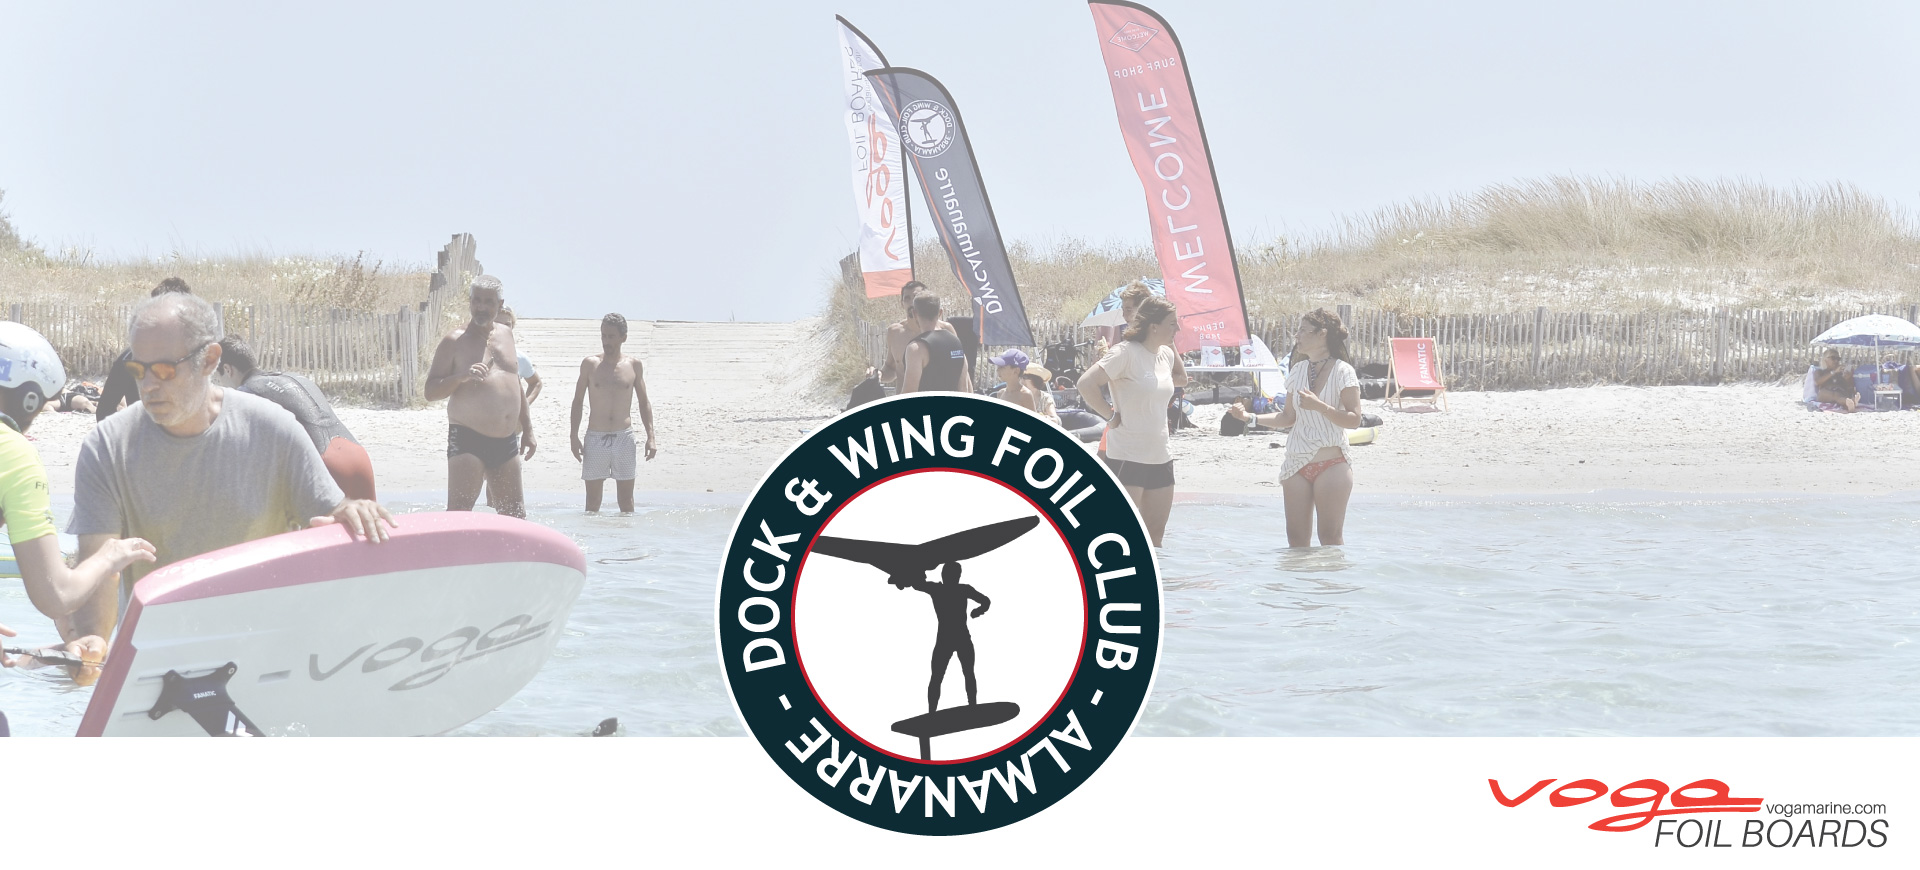 Voga Marine collabs dock and wing foil club almanarre banner